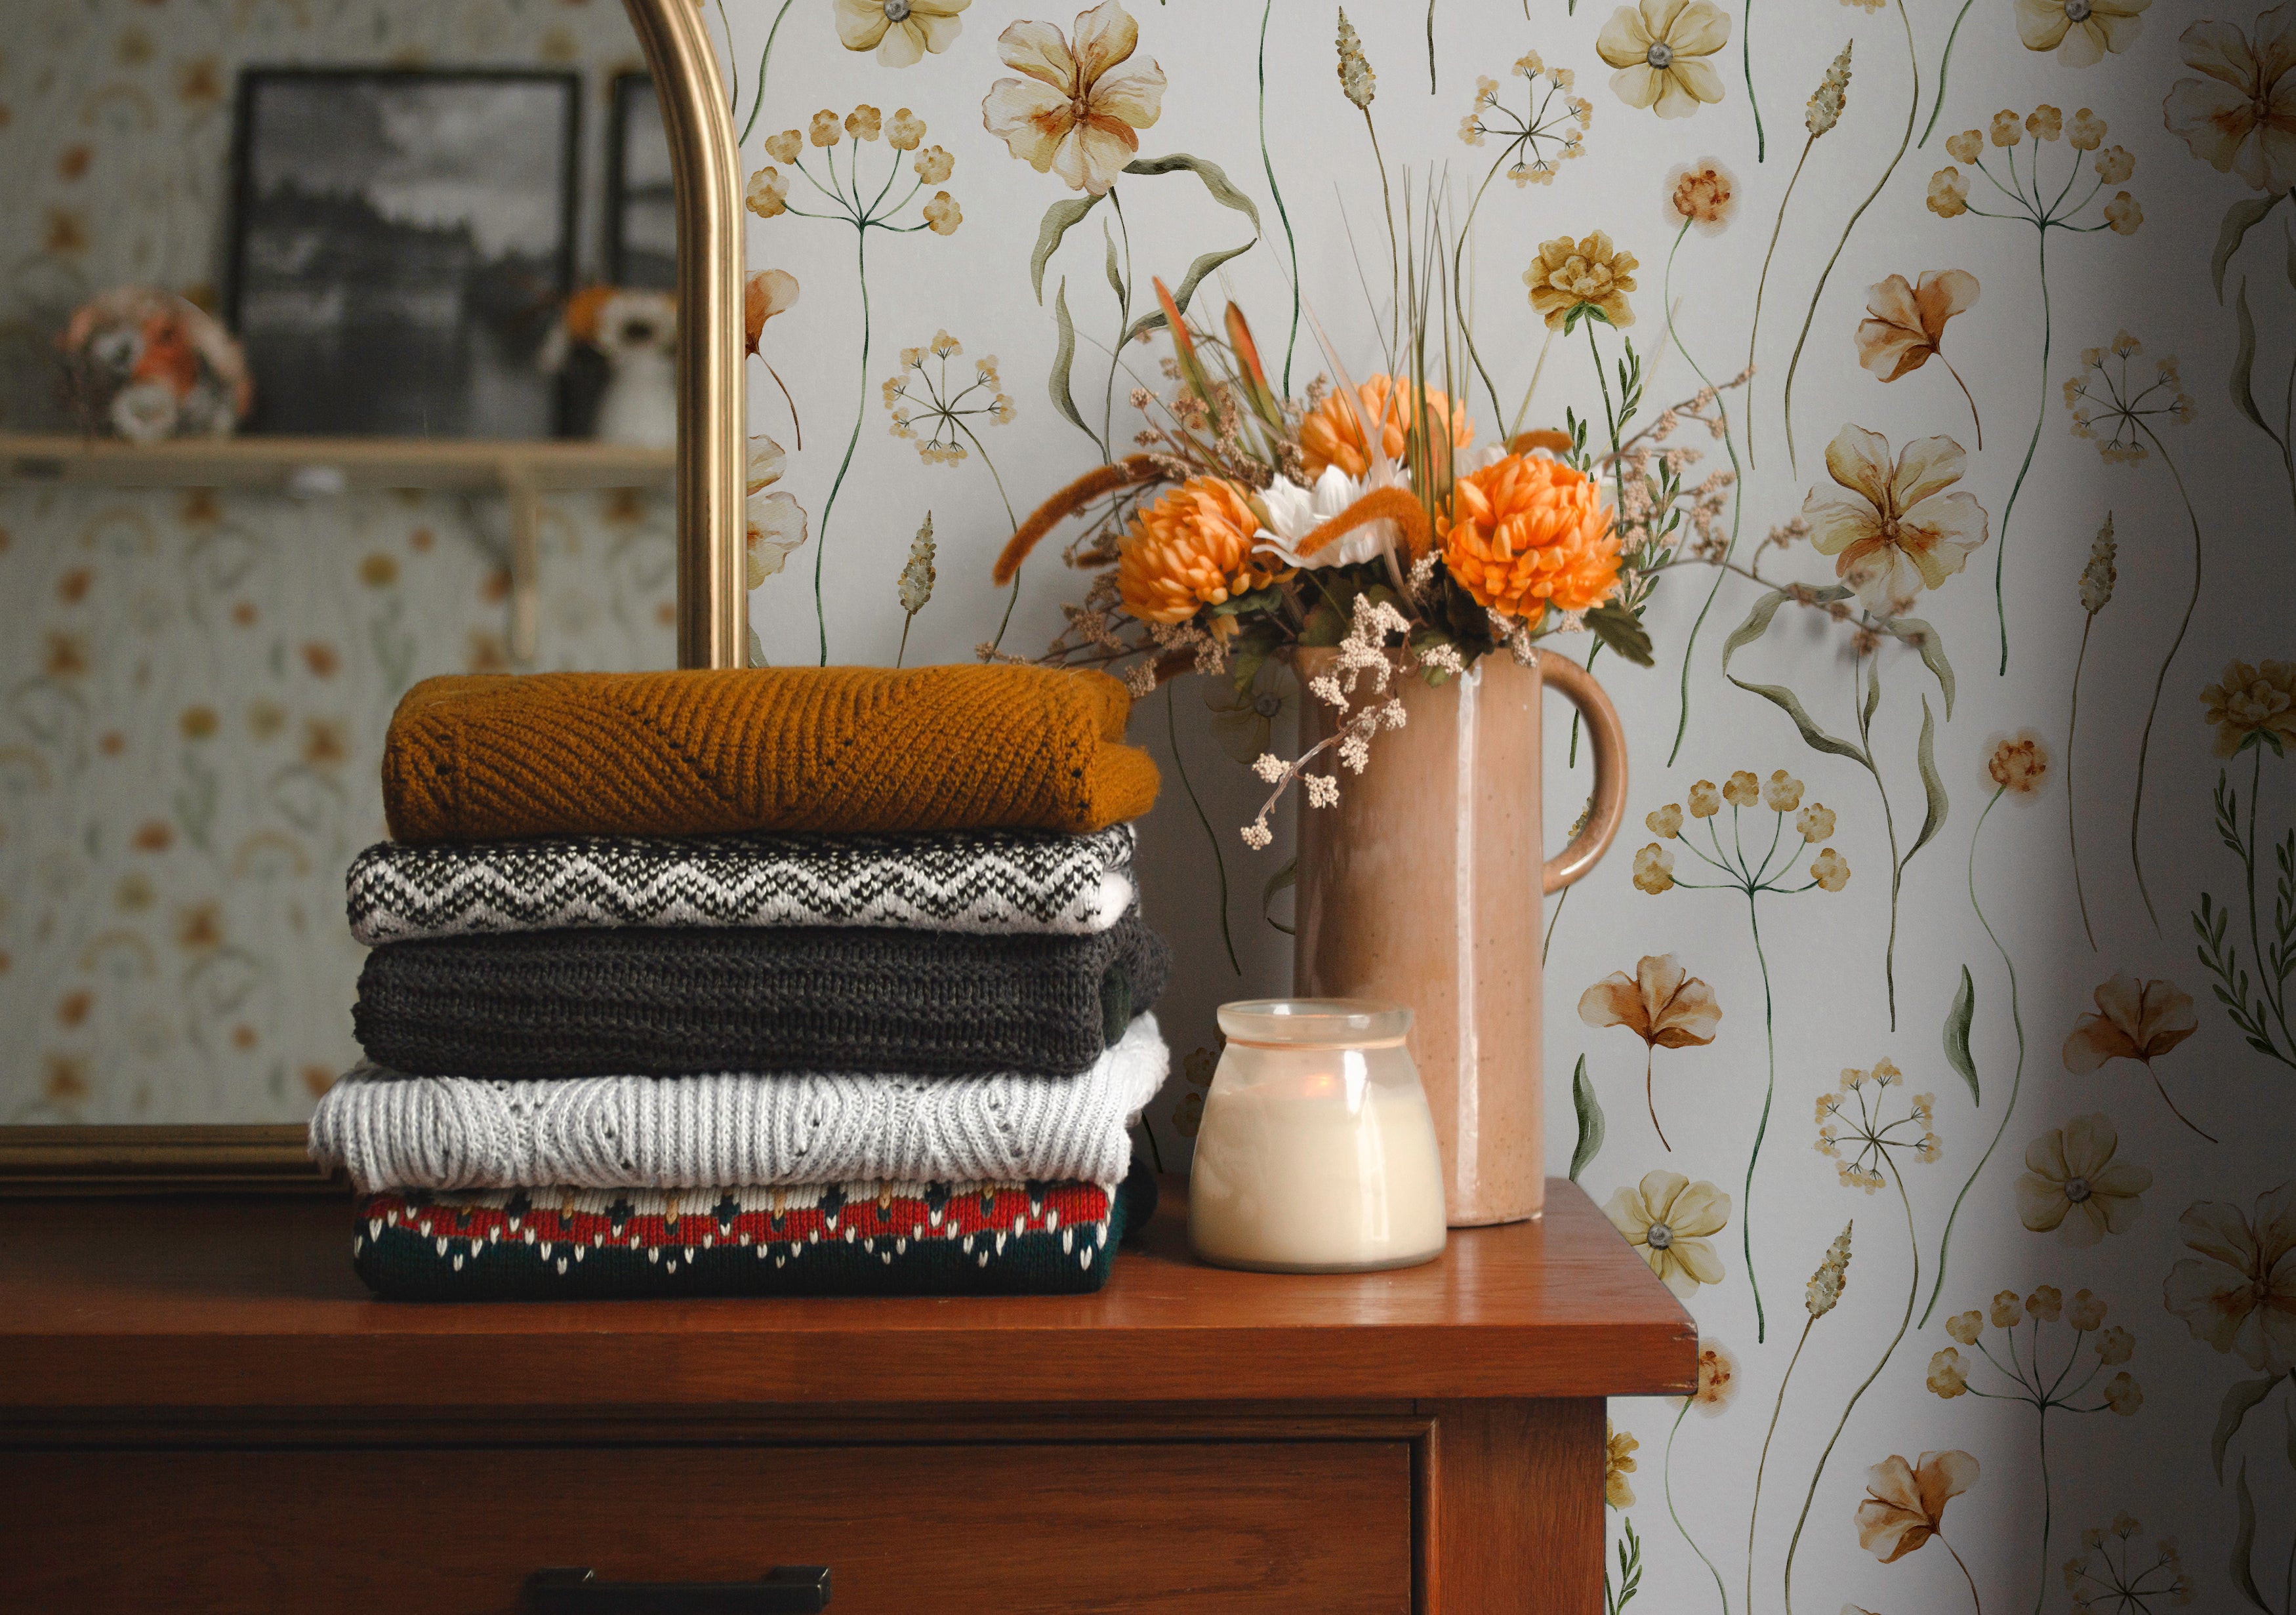 A cozy corner of a room showcasing the Warm Glow Floral Wallpaper, adorned with delicate watercolor flowers in warm, earthy tones. The scene includes a stack of folded sweaters and a vintage vase with vibrant orange flowers, enhancing the wallpaper's warm, inviting feel